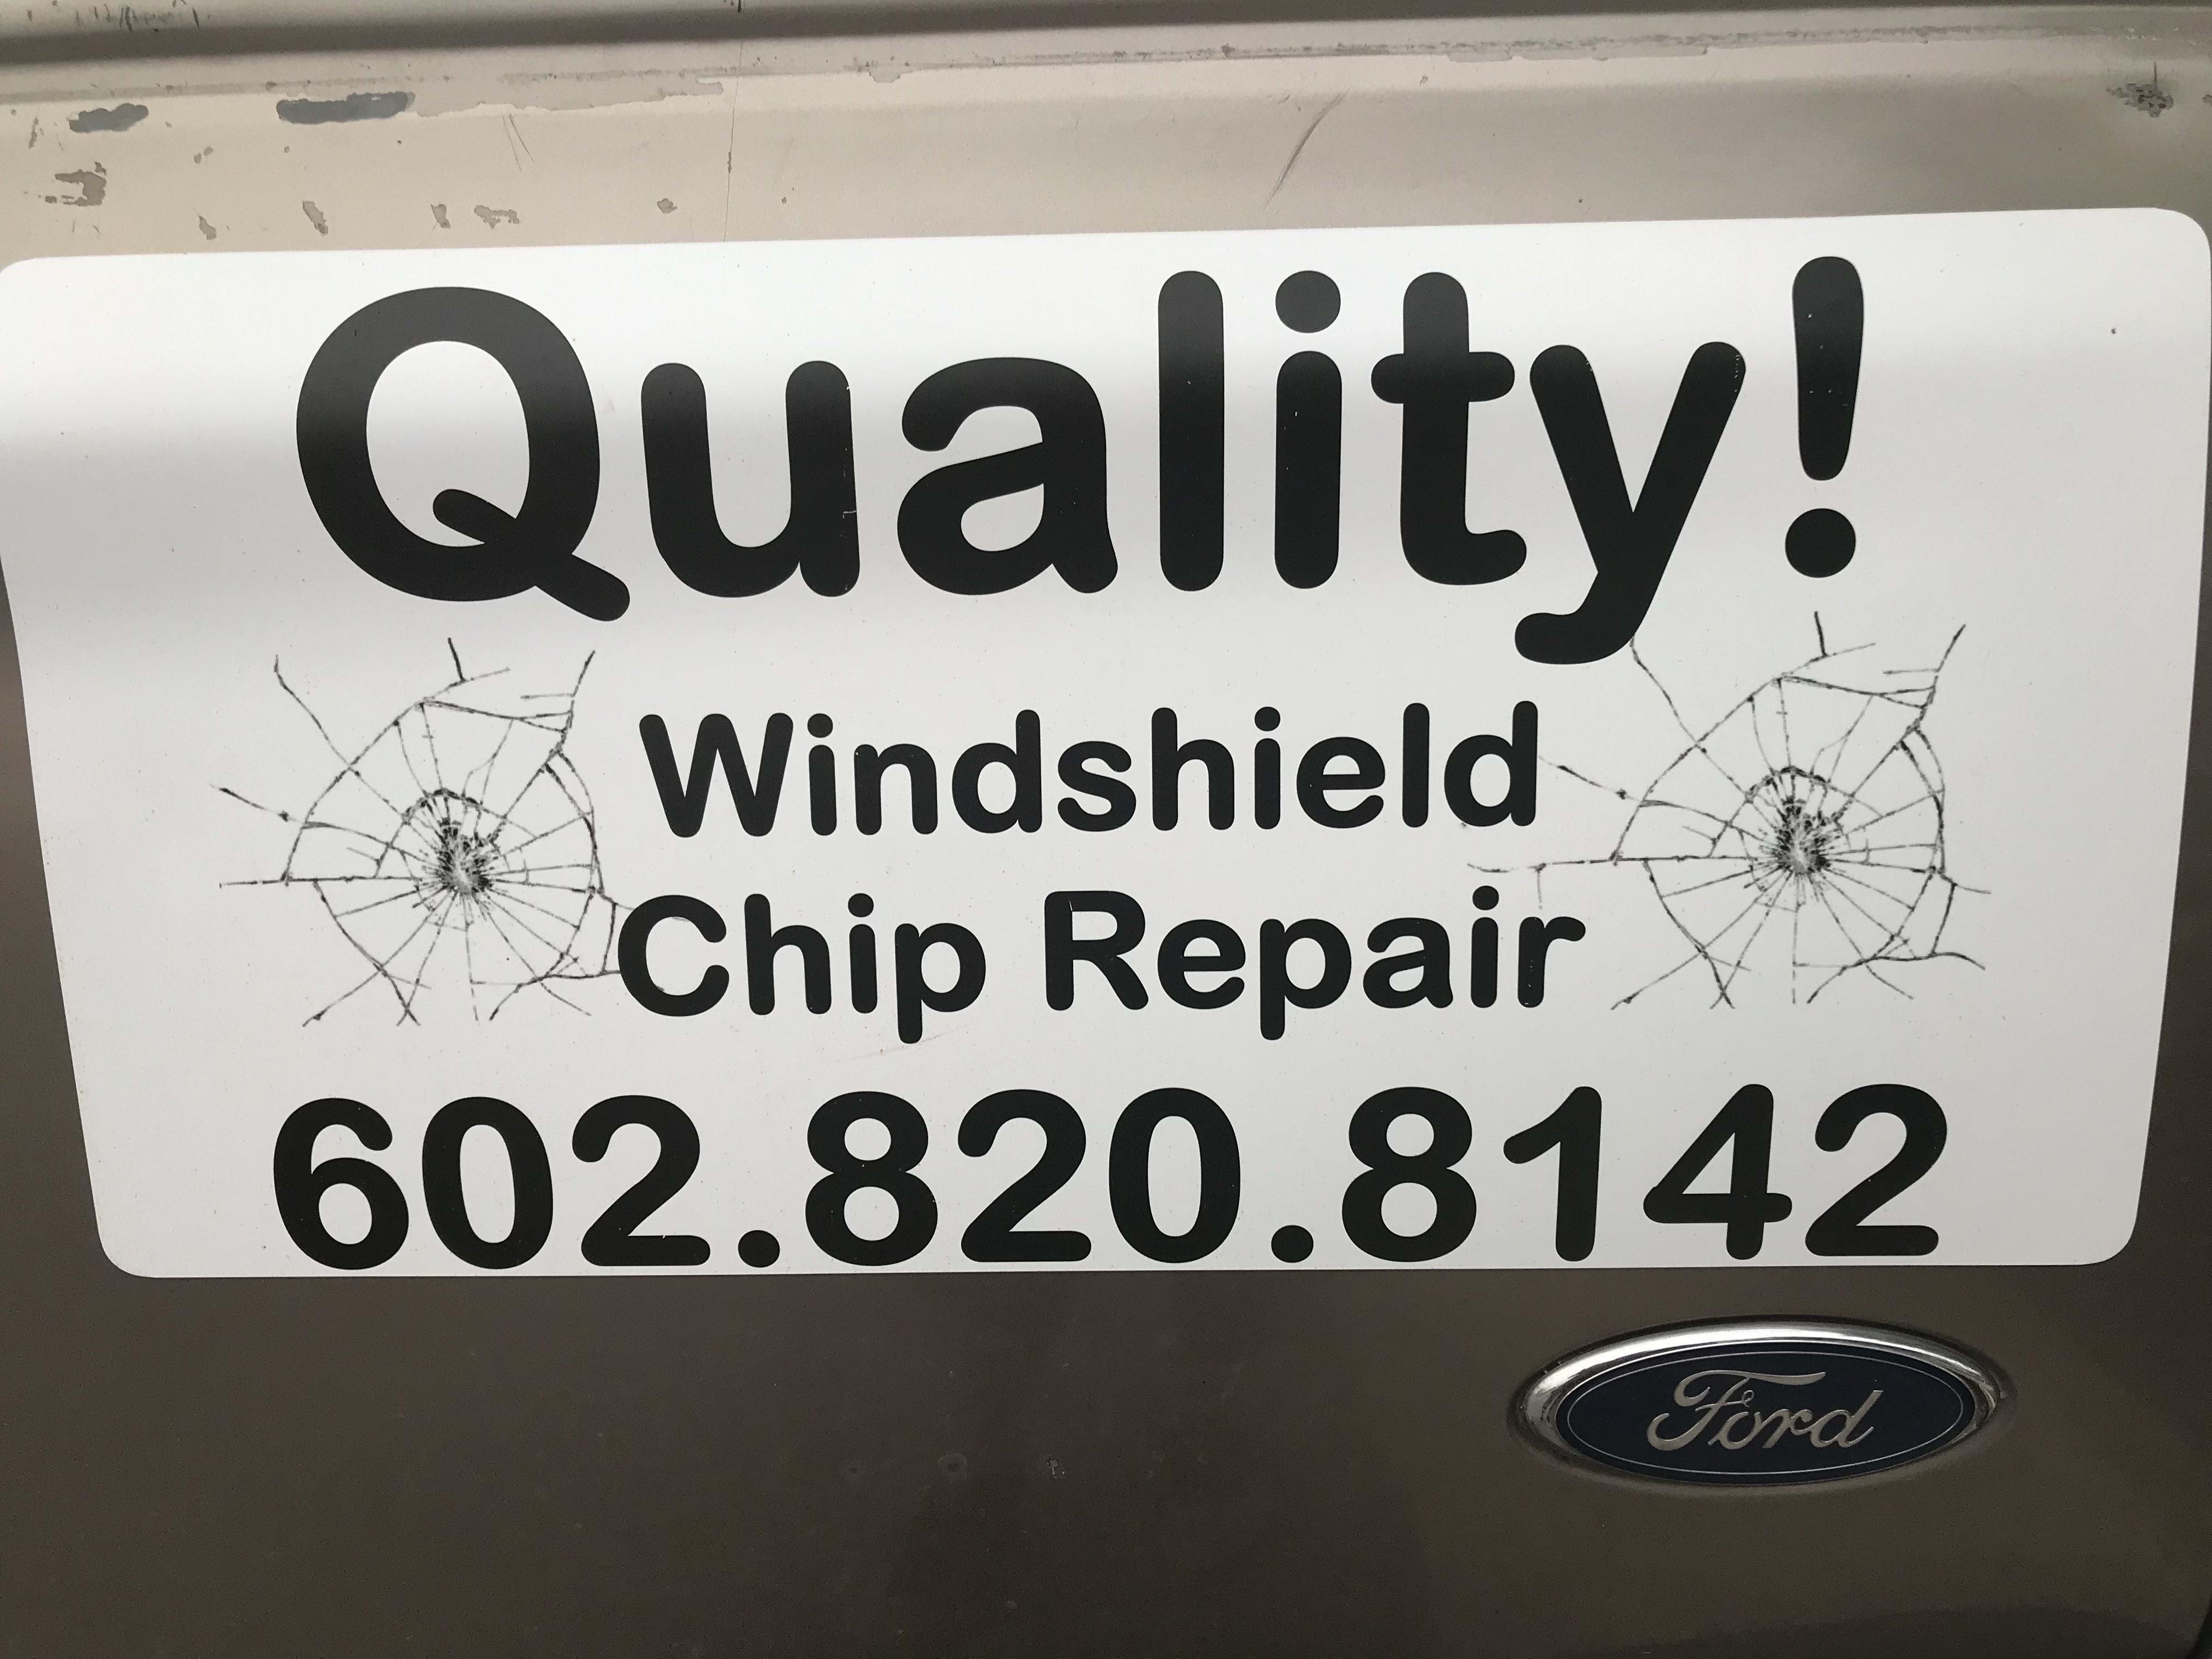 Quality Windshield Chip Repair